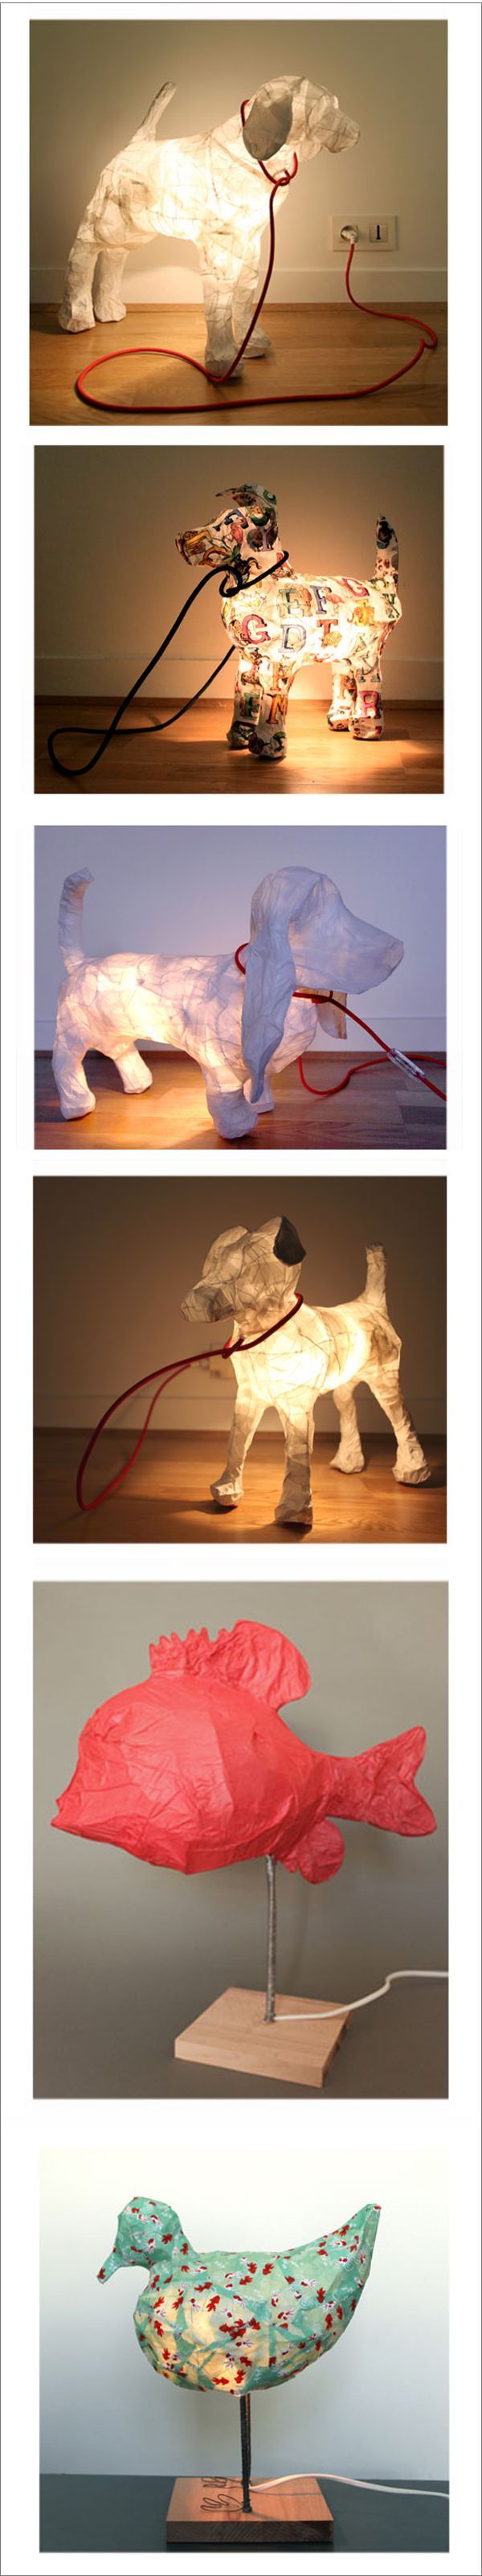 animal-shaped paper lamps – great for those who want a dog but cant have one, or want a guard dog to watch over them at night!